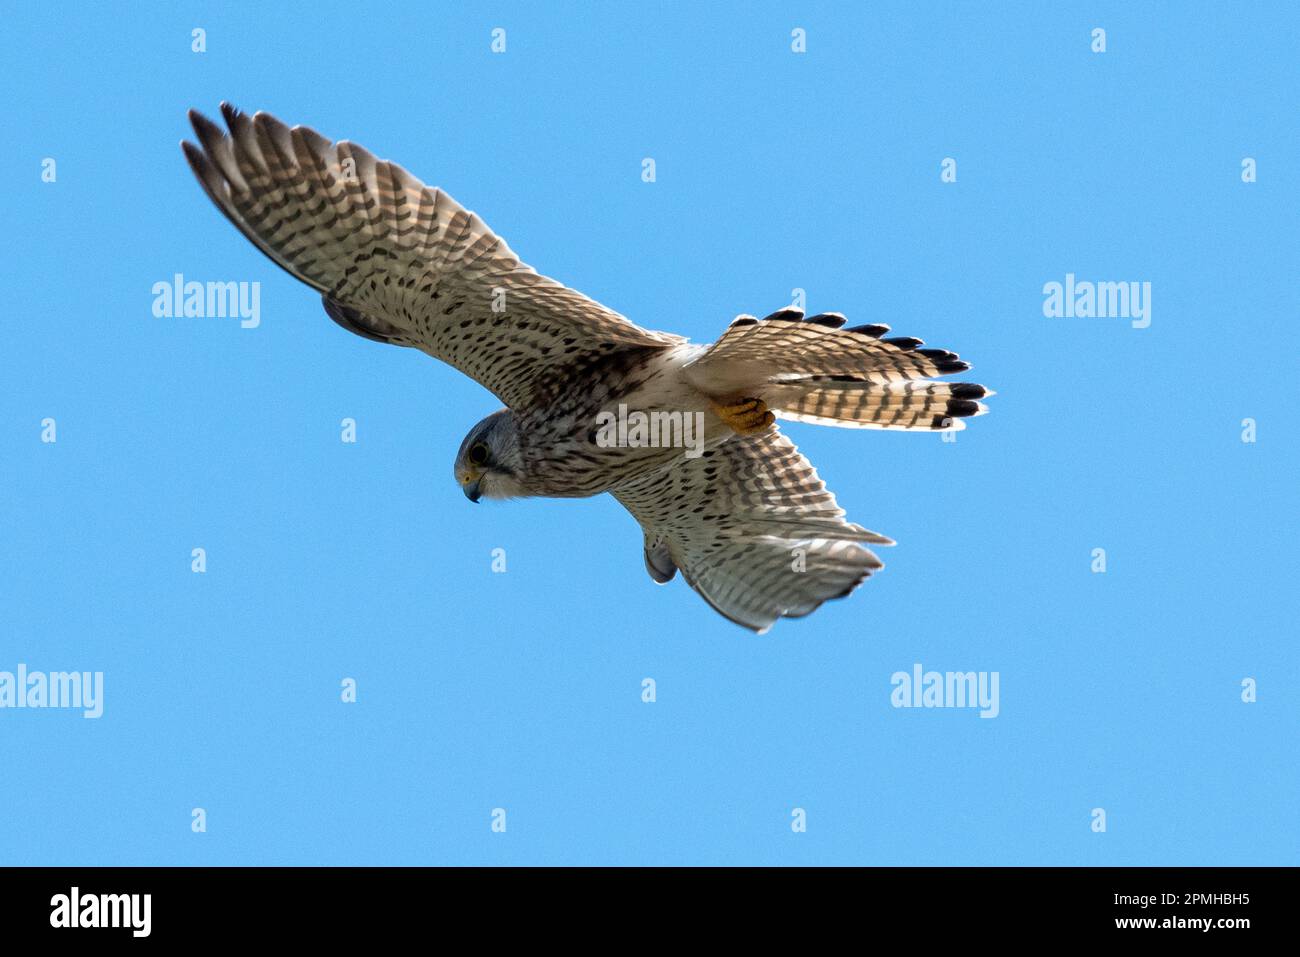 A kestrel hovering in a bright blue sky Stock Photo